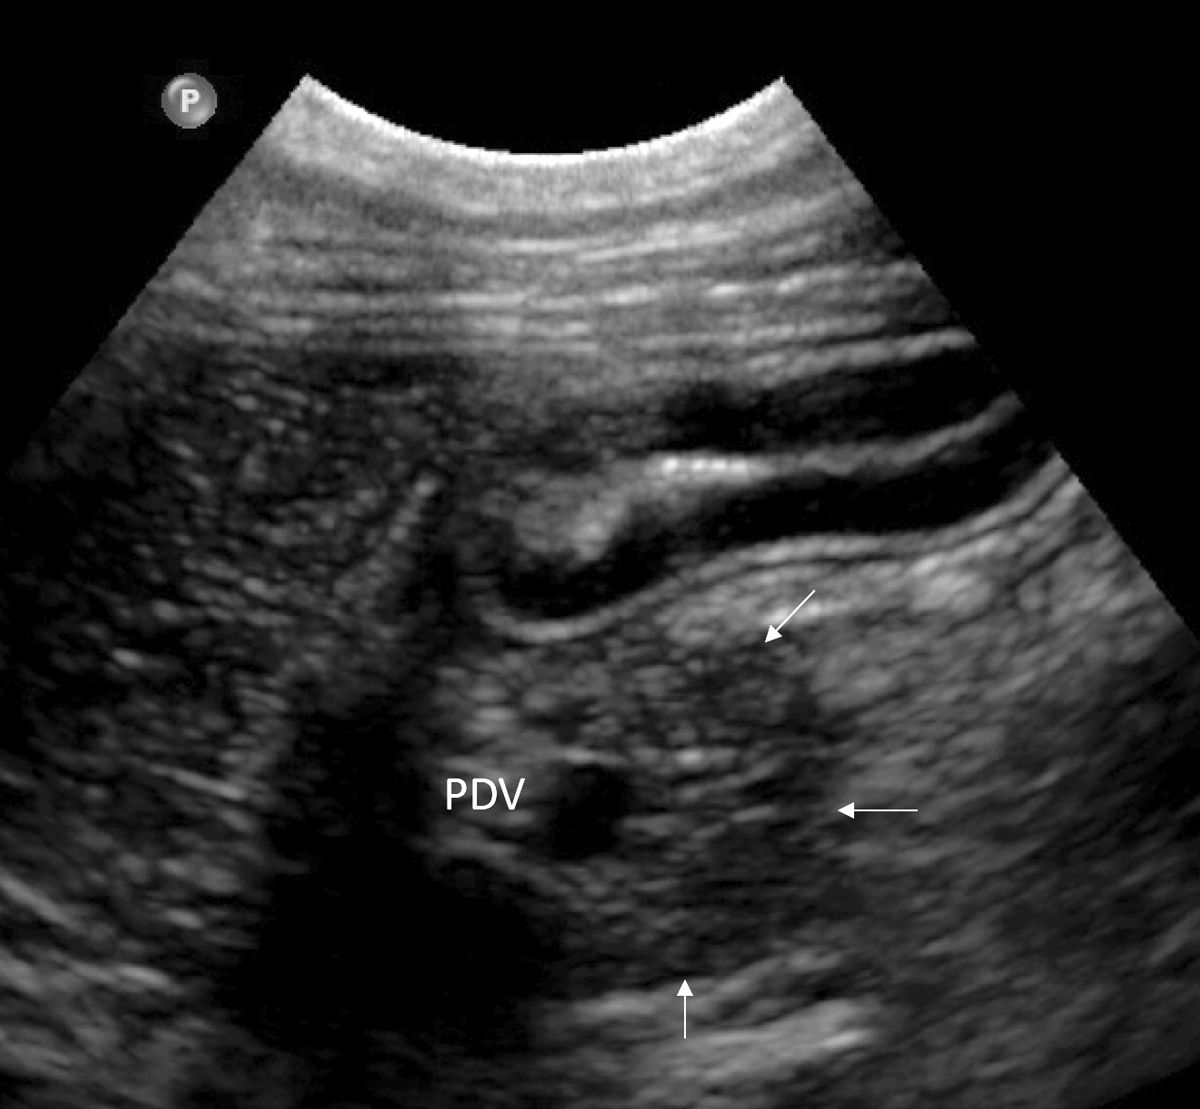 Ultrasound of a normal pancreas (white arrows) in a dog. The right pancreatic lobe is found alongside the duodenum and can be localized by visualization of the pancreatico-duodenal vein (PDV).